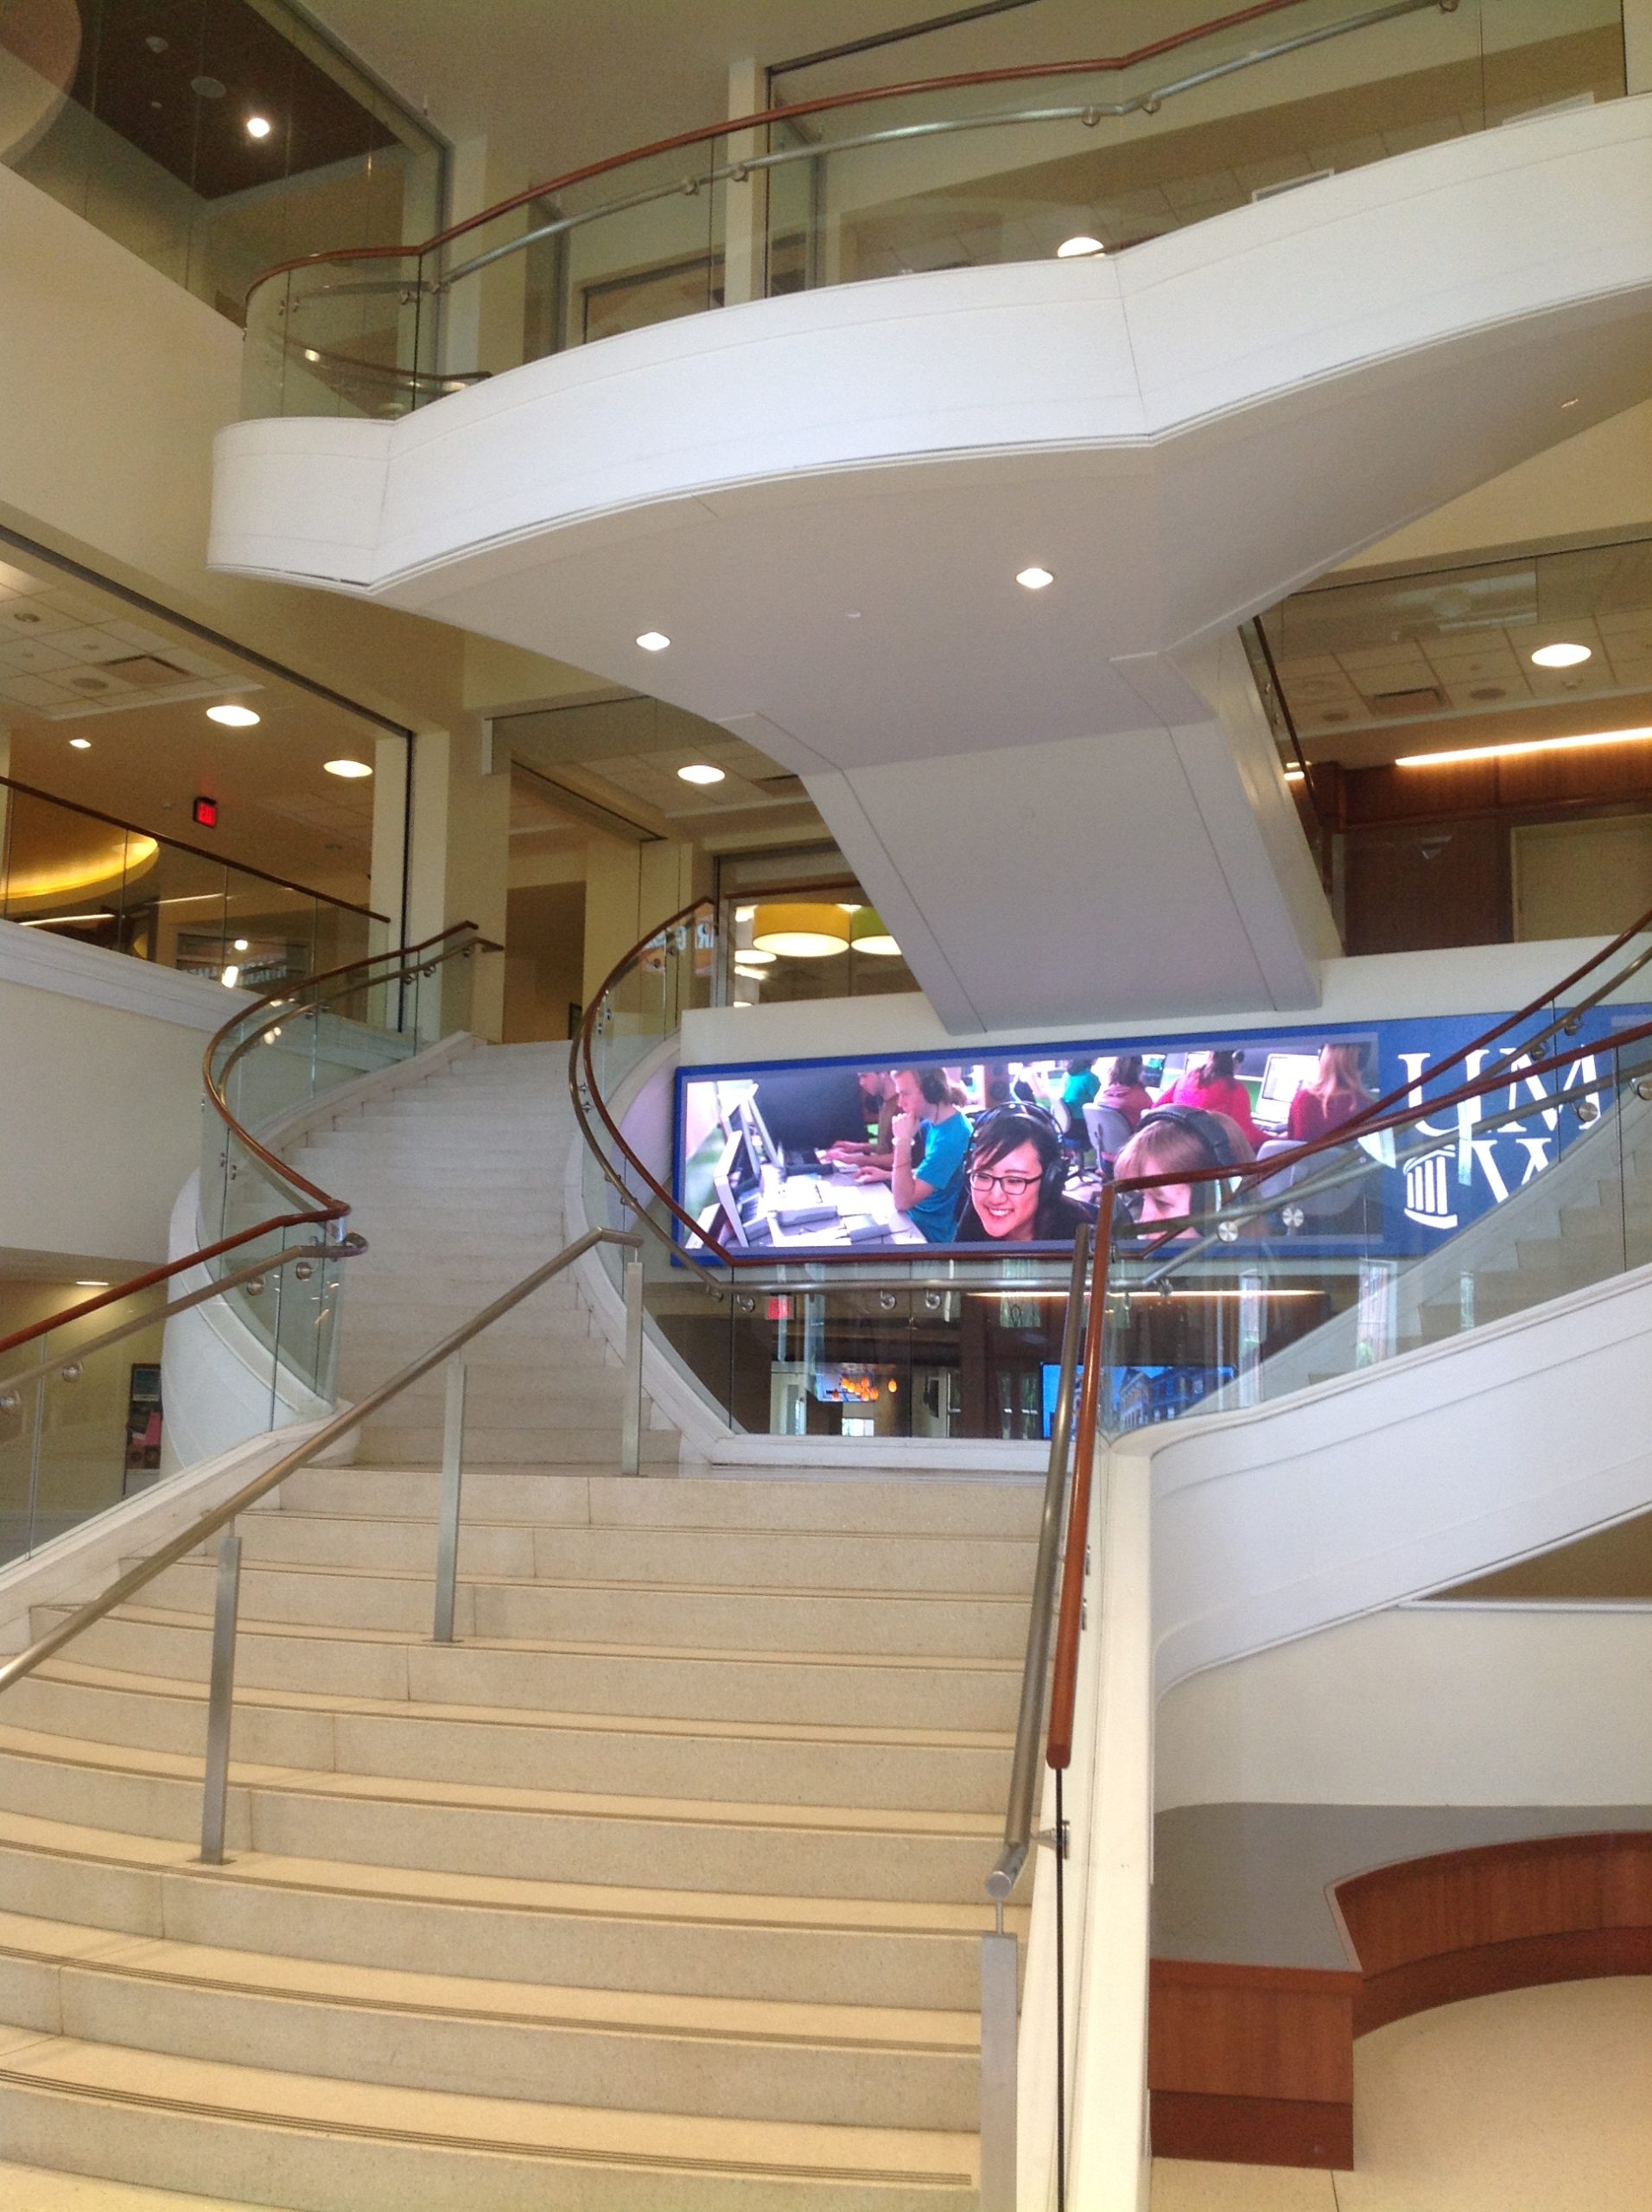 Image of second floor stairwell in the University Center